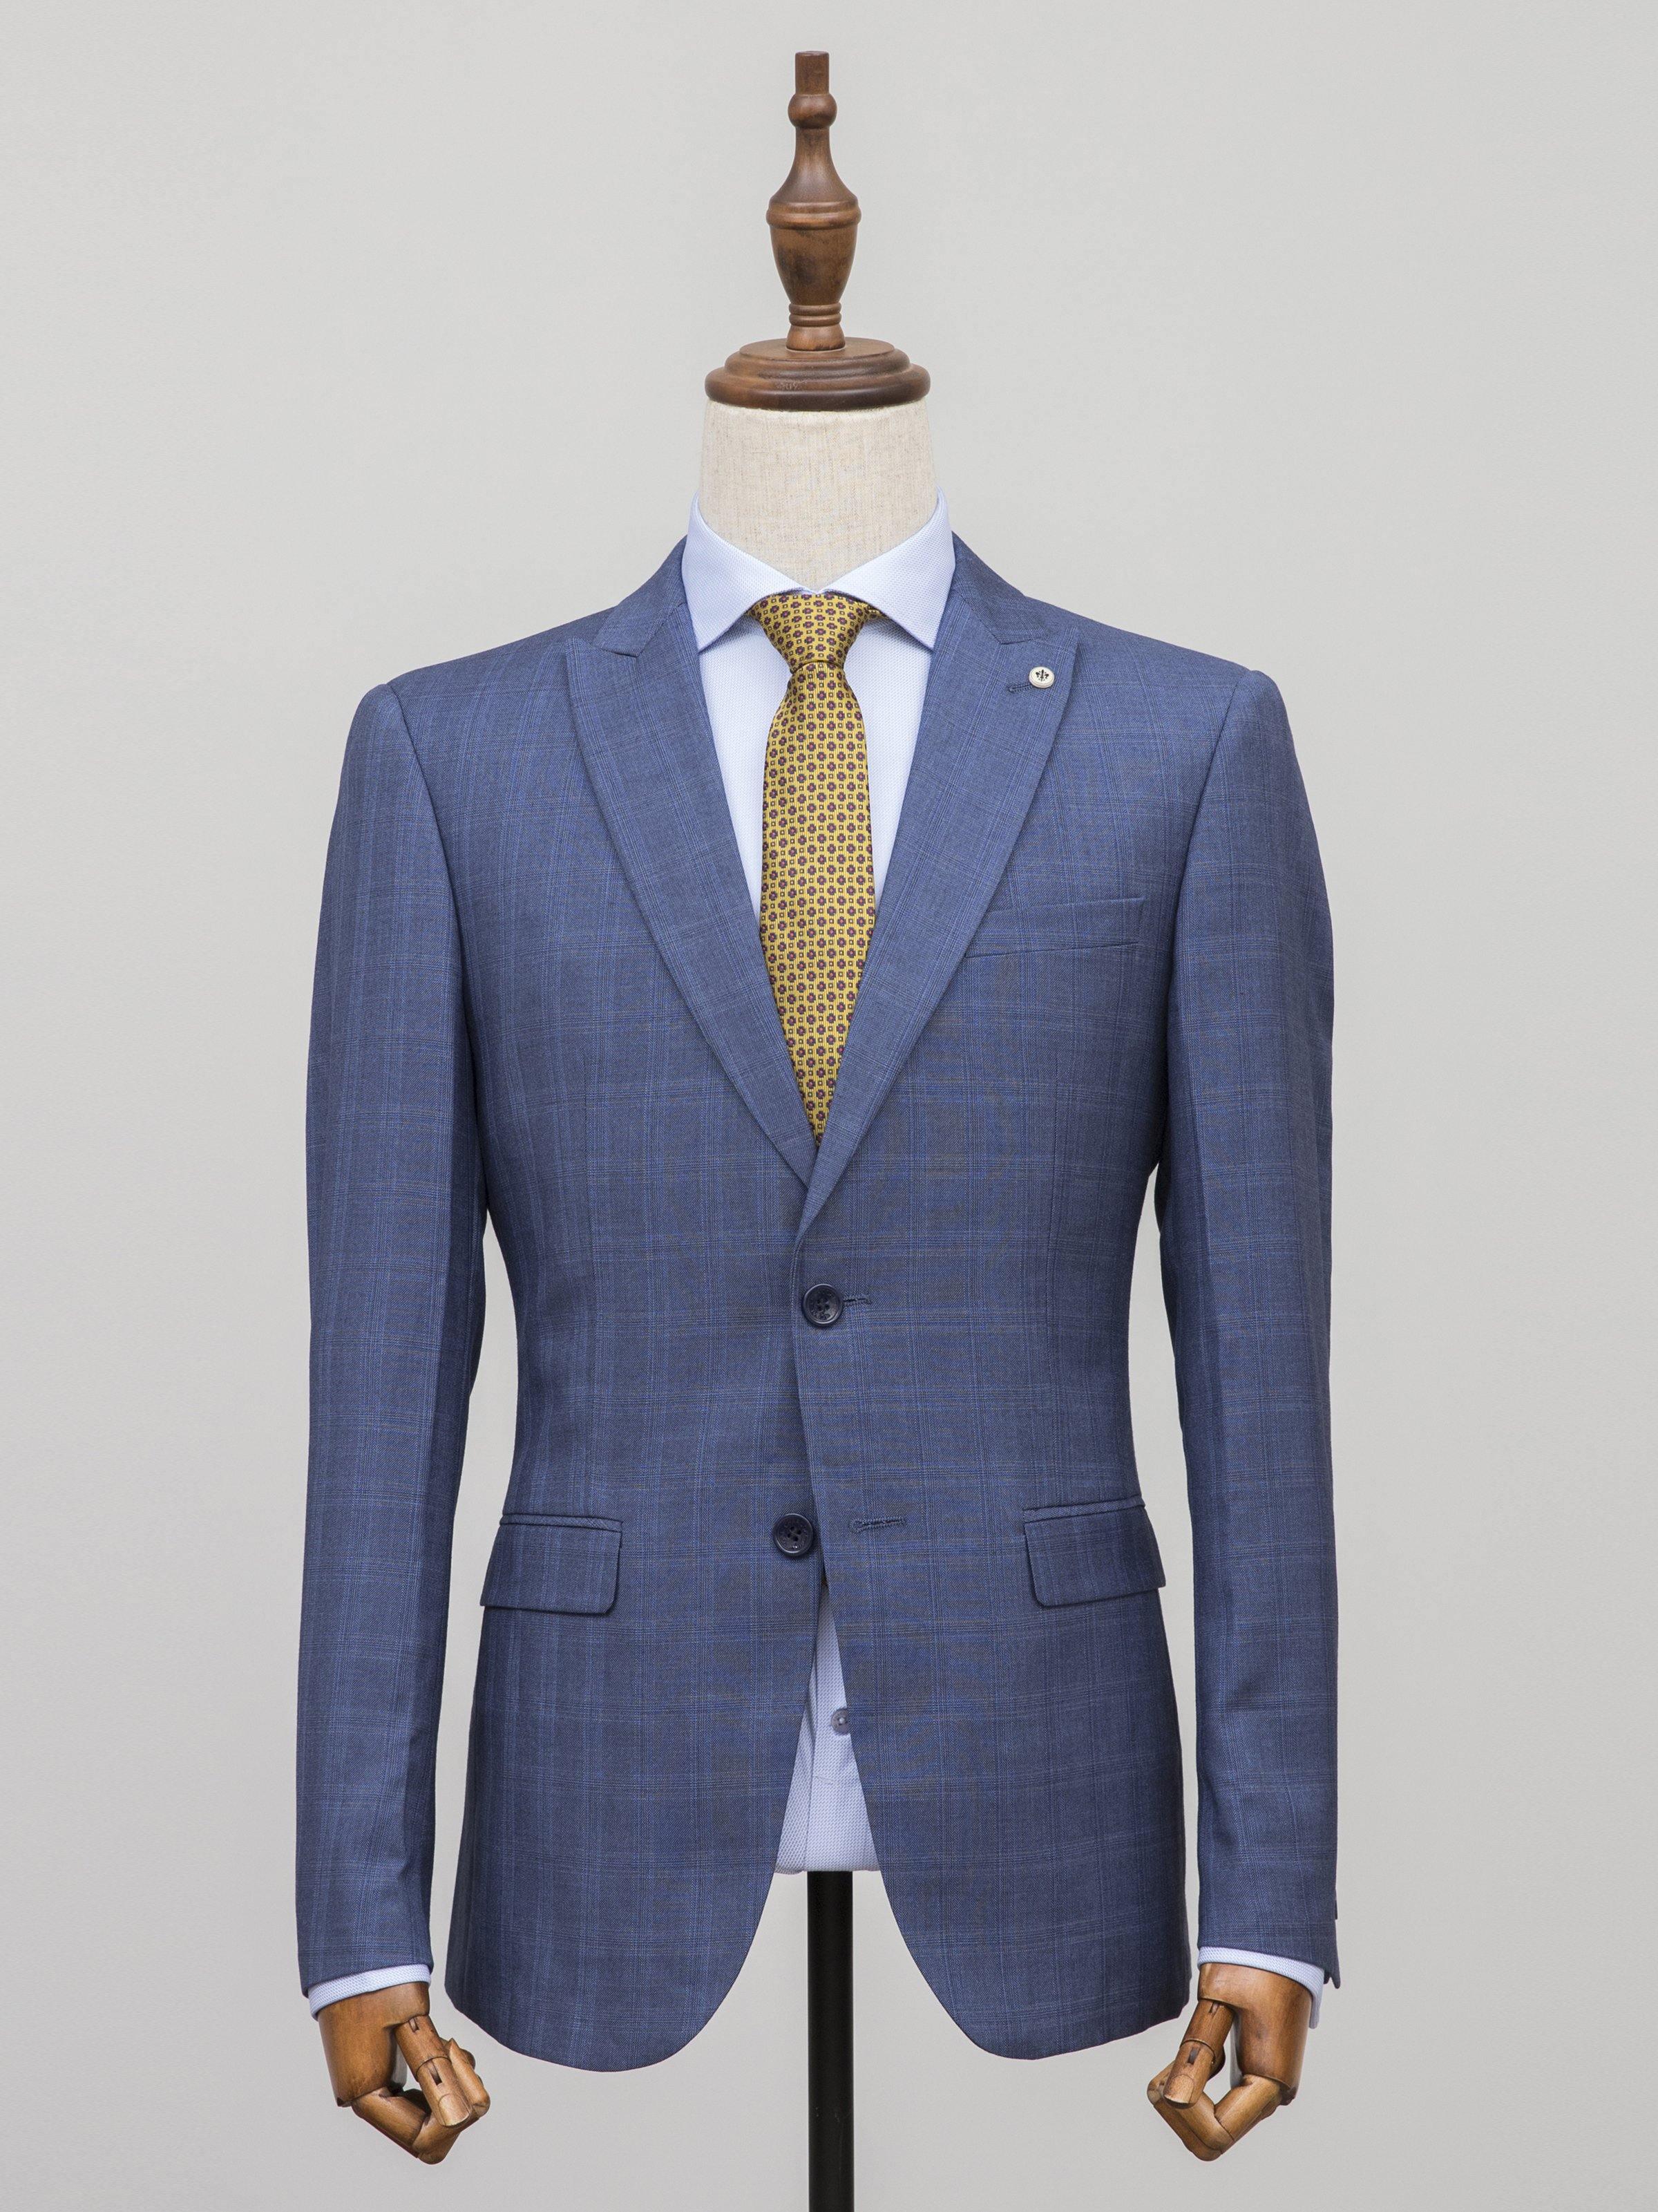 2 PIECE SUIT SLIM FIT BLUE GREY at Charcoal Clothing